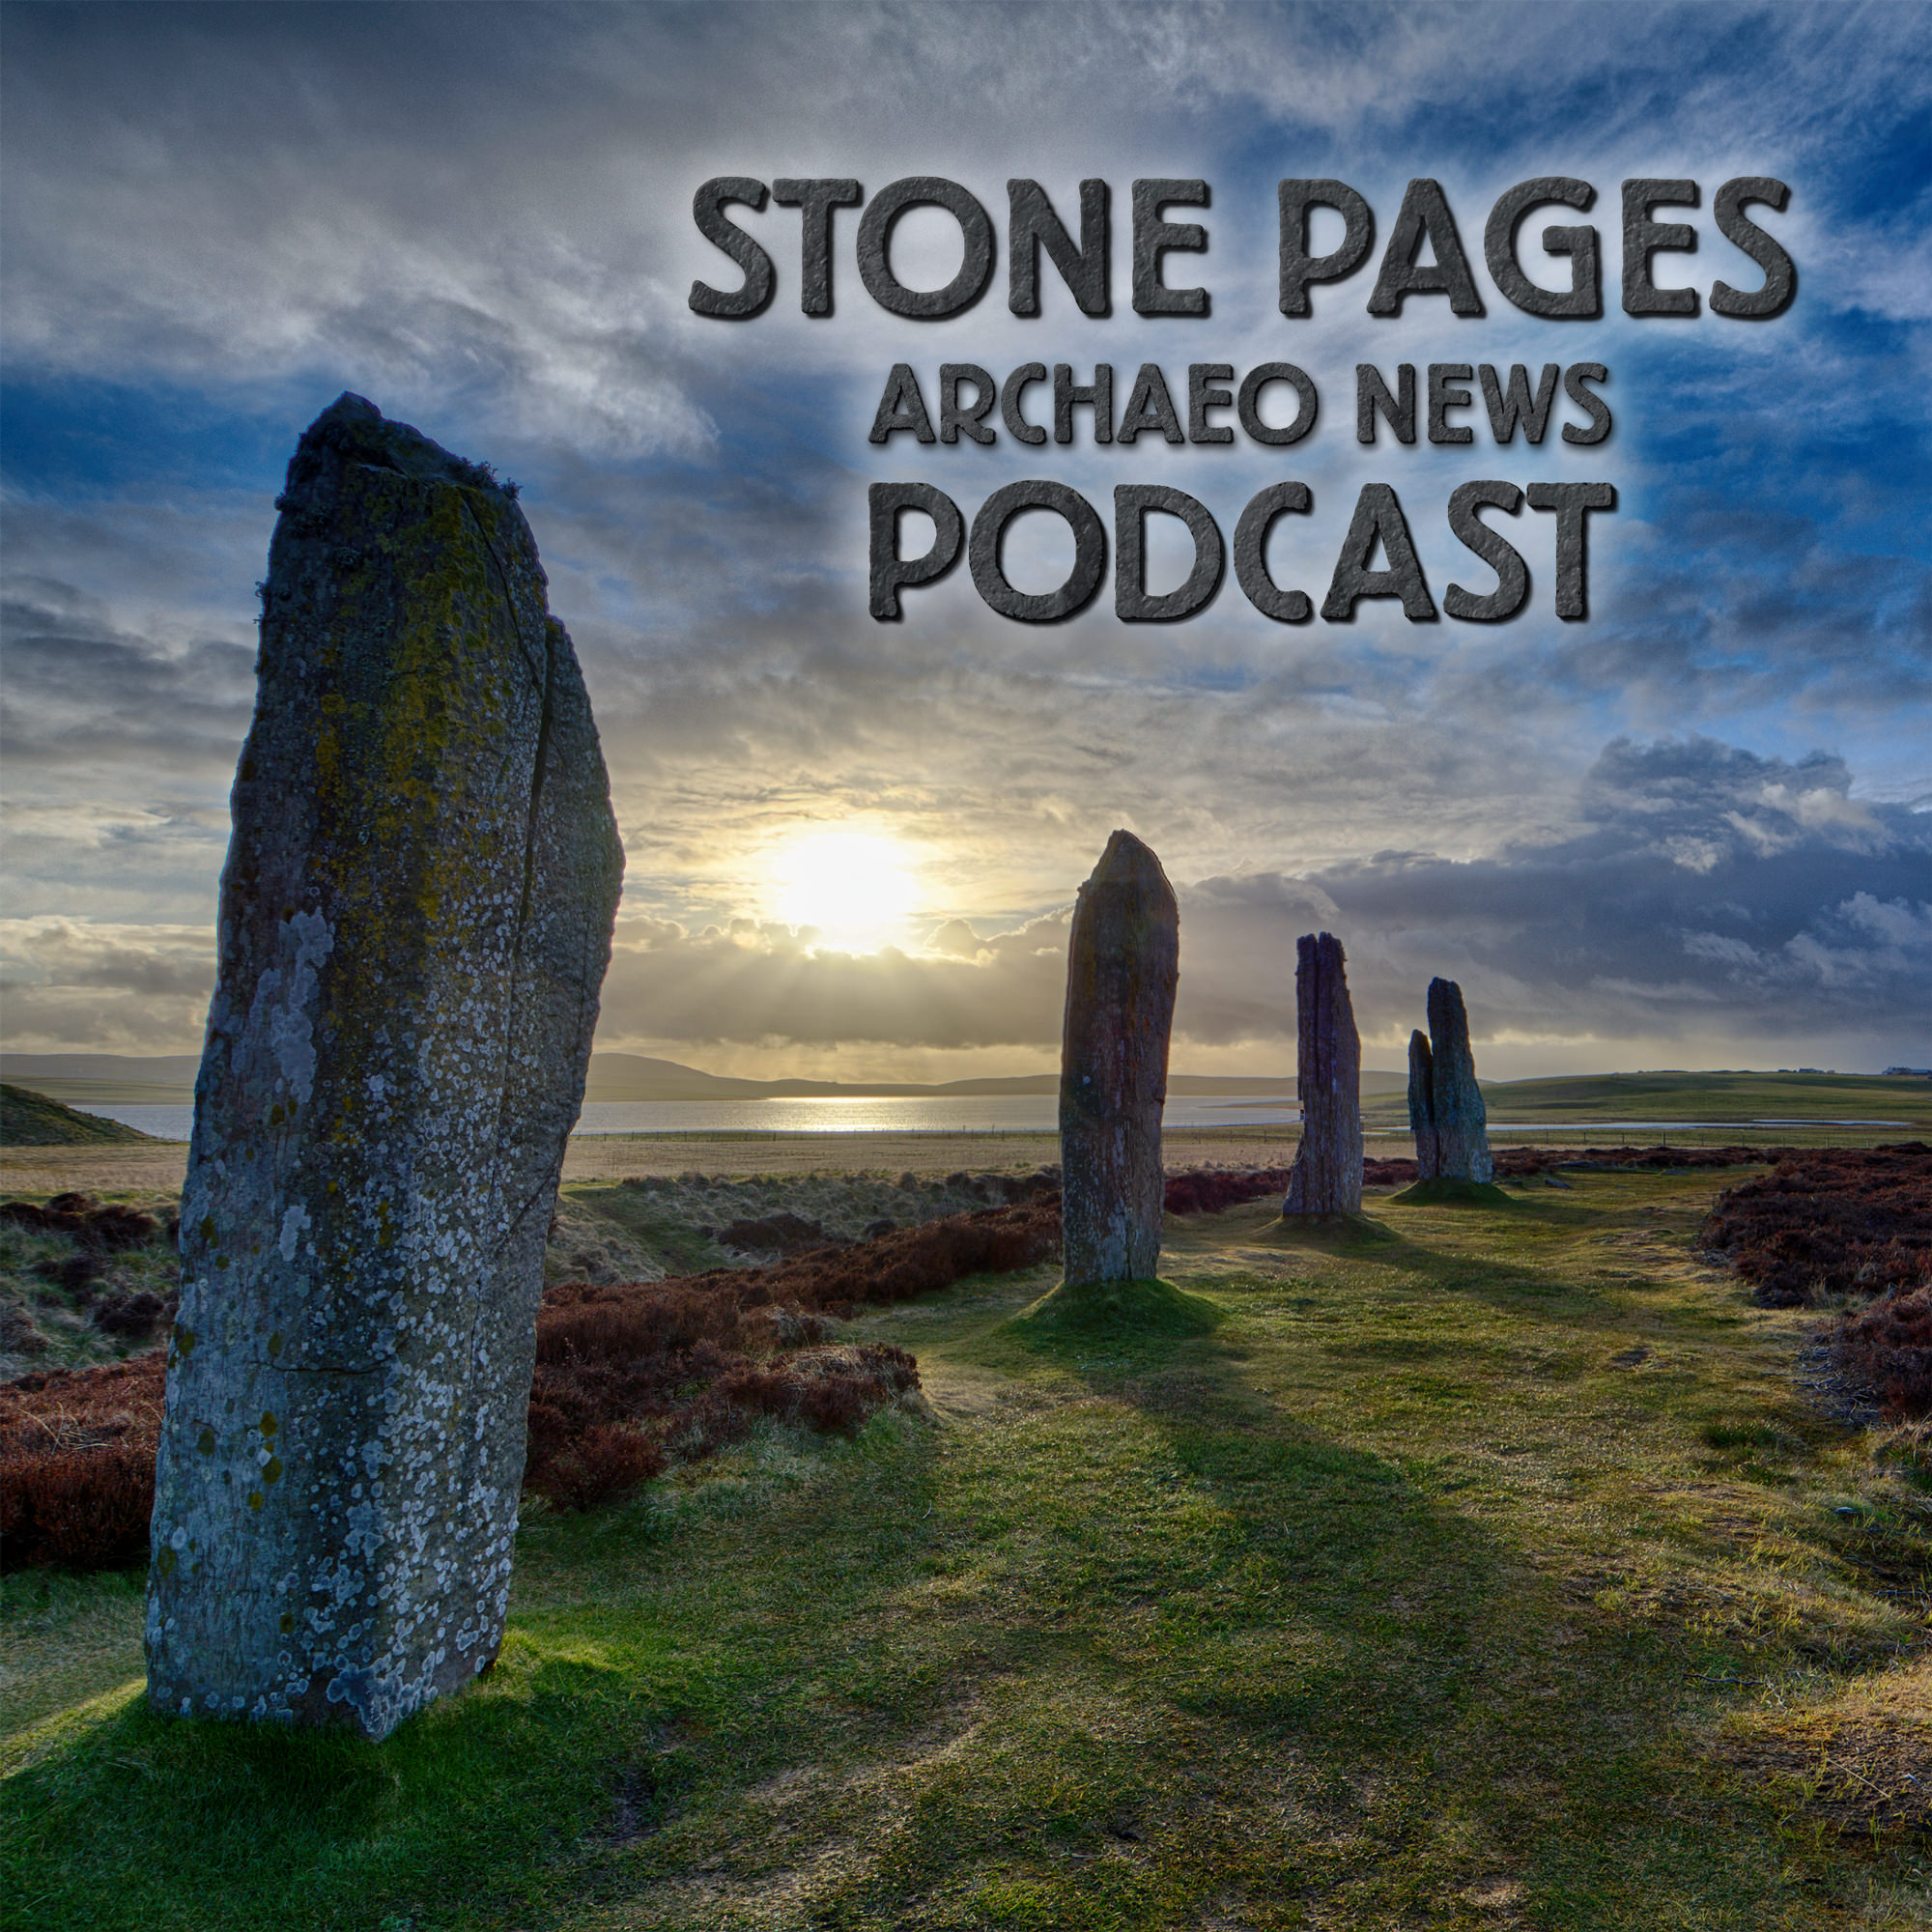 Stone Pages Archaeo News